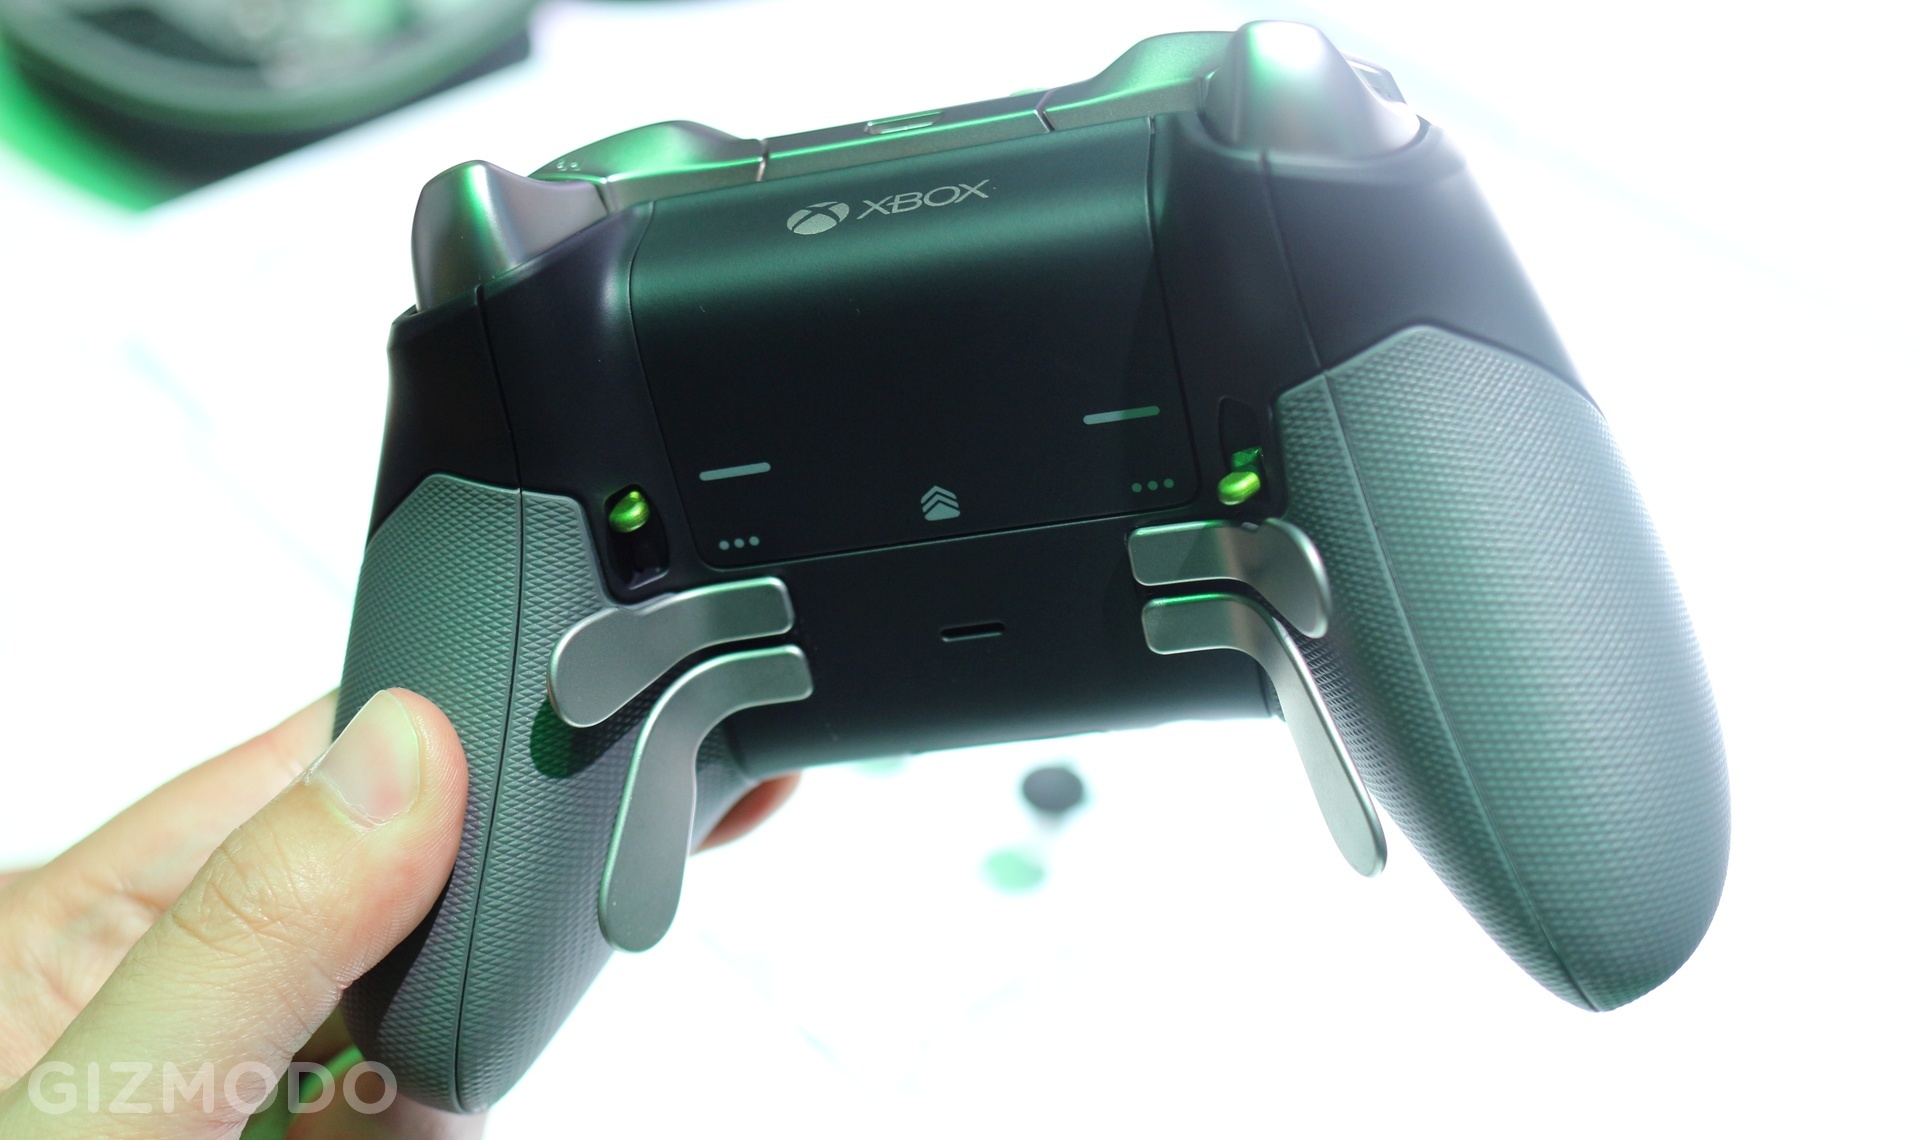 So This Is What A $150 Xbox Controller Feels Like